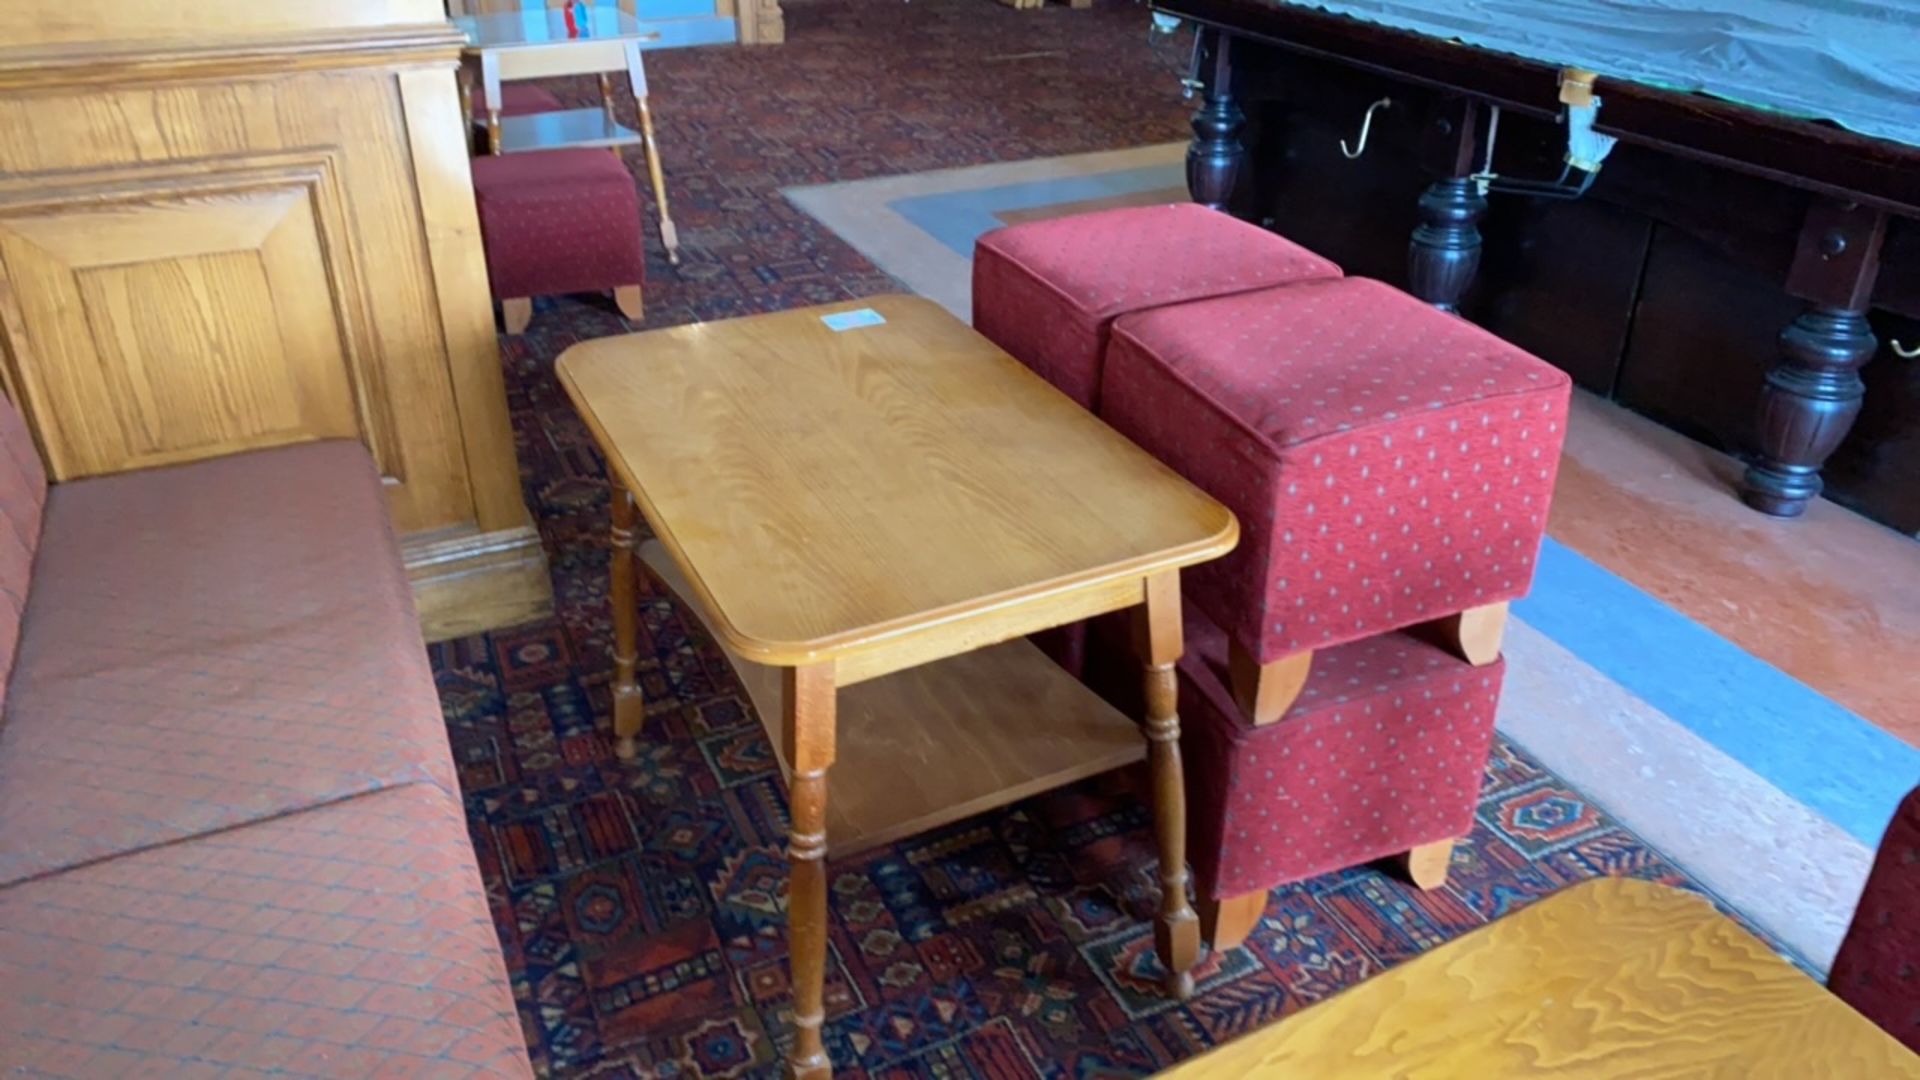 Rectangular Wooden Table With Four Pouffes - Image 3 of 4